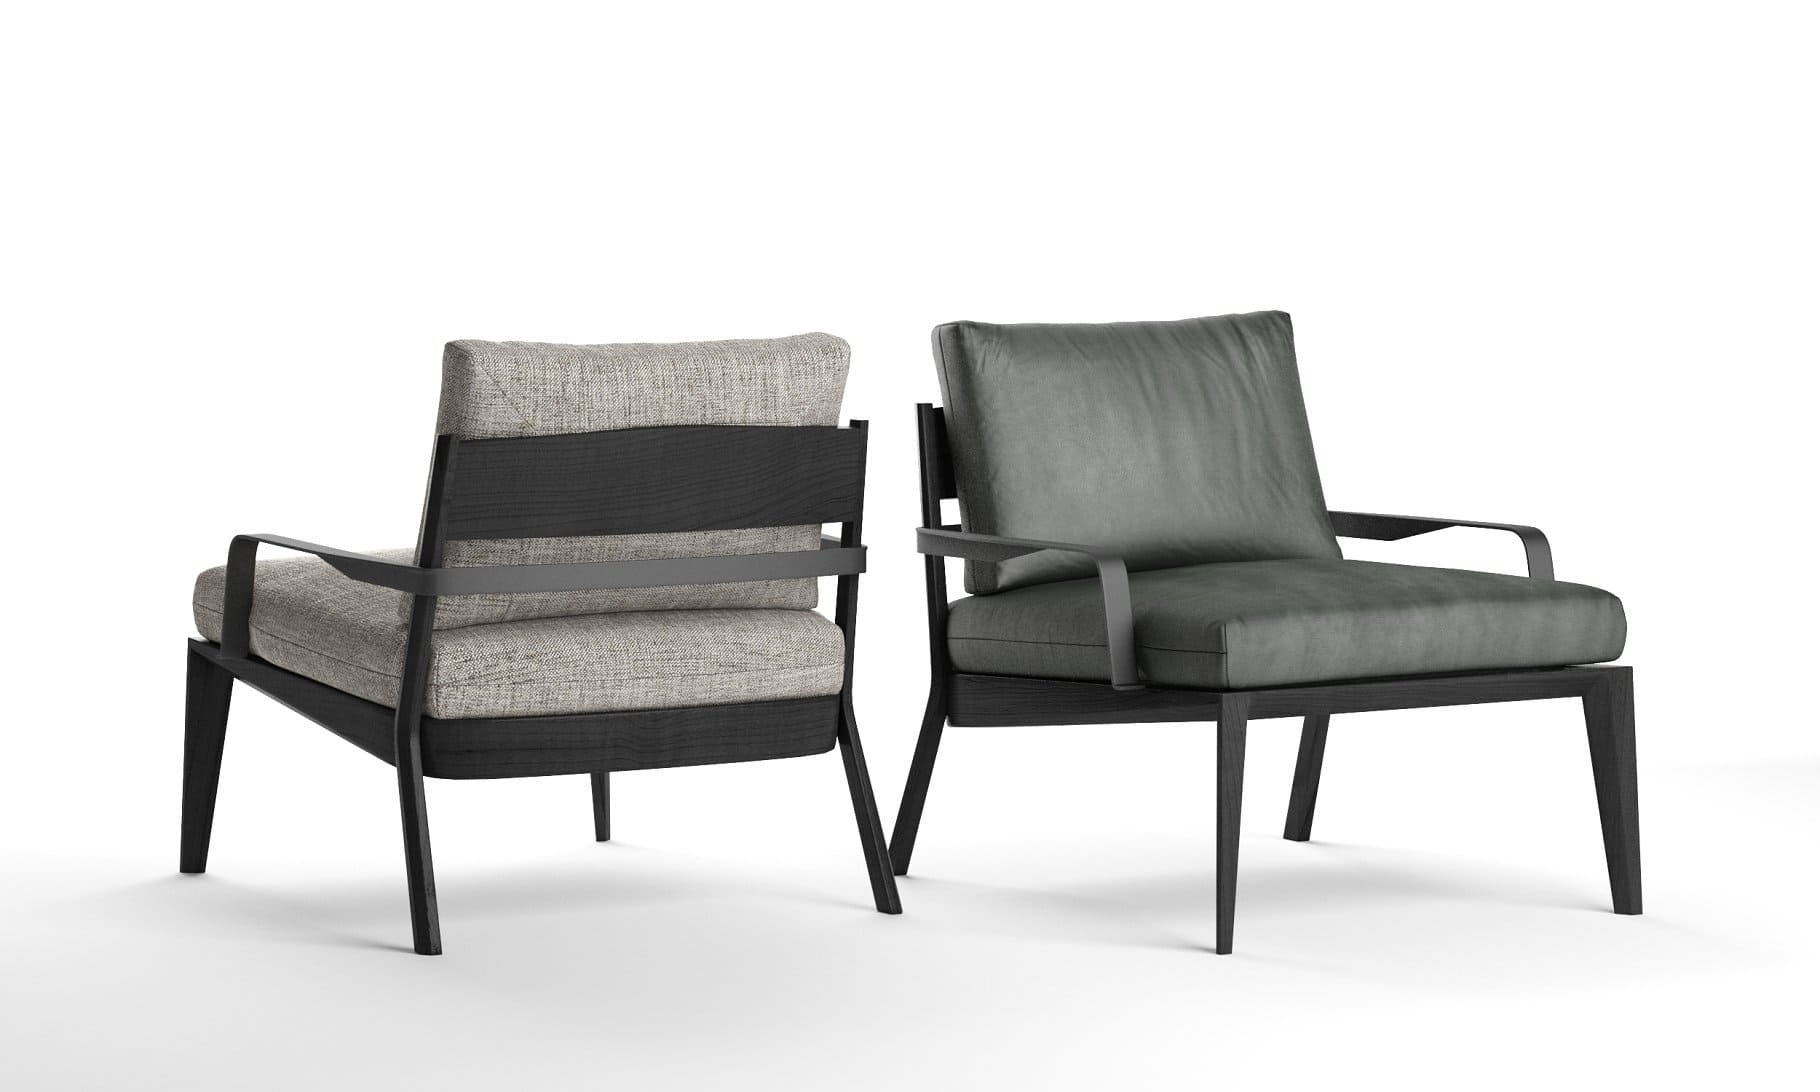 Design of the Viaggio Armchair Natuzzi Italia from the front and back.